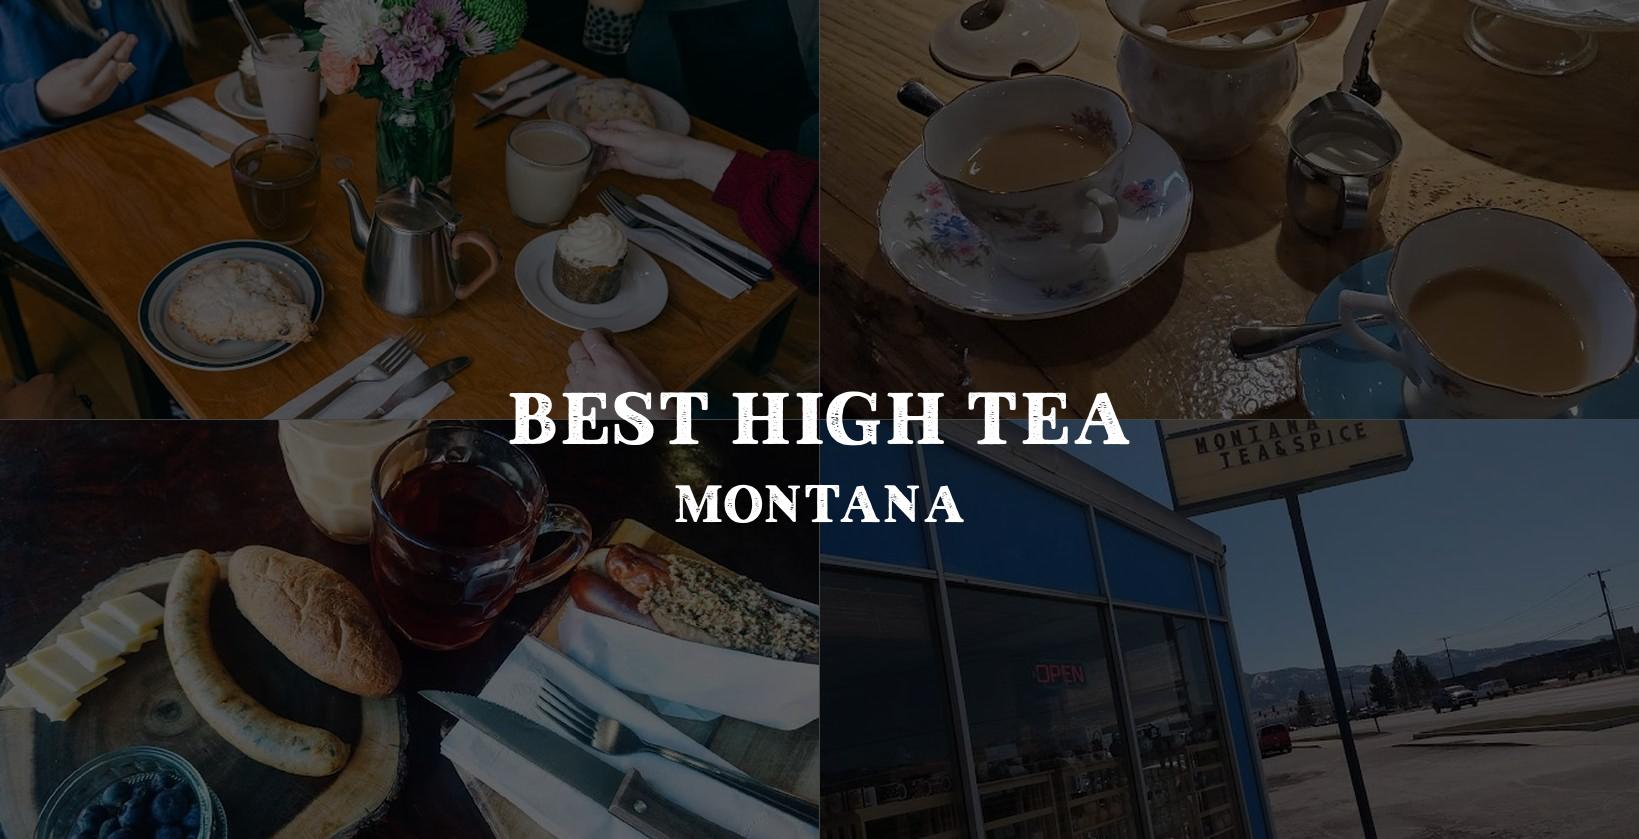 Choosing the perfect spot for High Tea in Montana